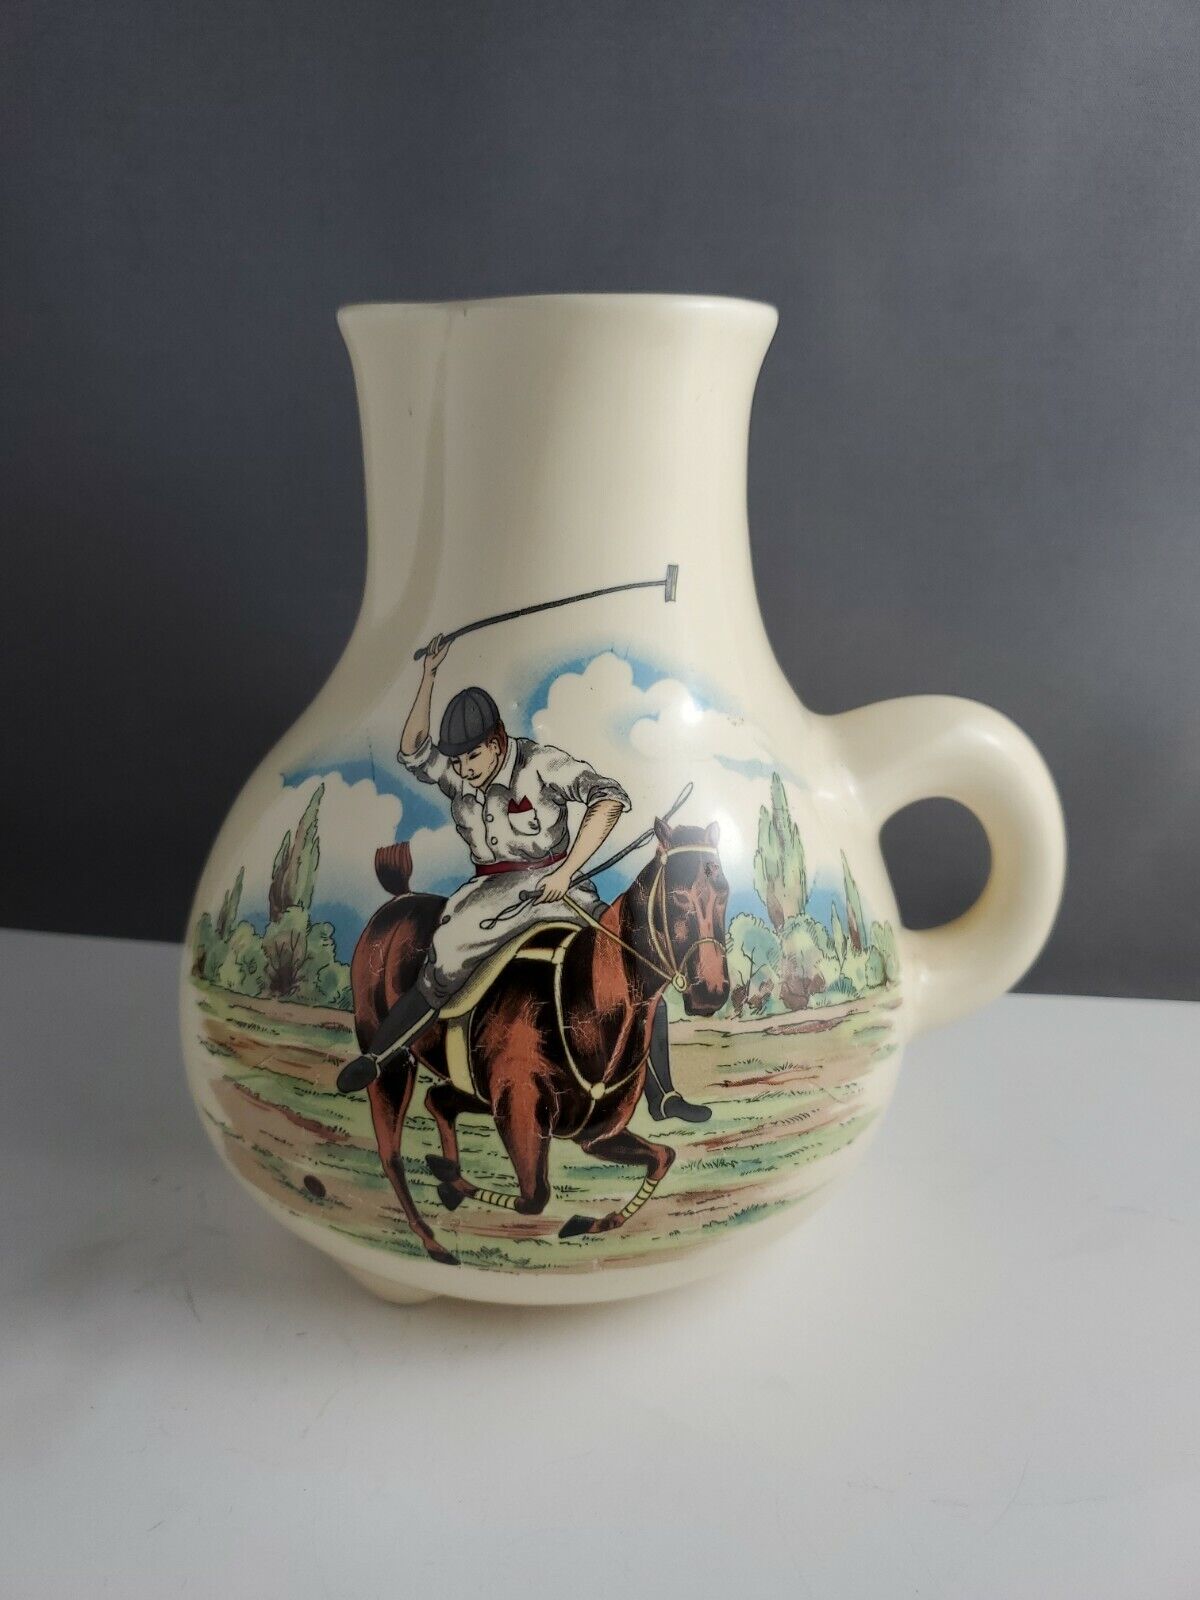 Vintage Polo Pony Bedside Water Ewer Pitcher By Lord & Taylor Made In Japan